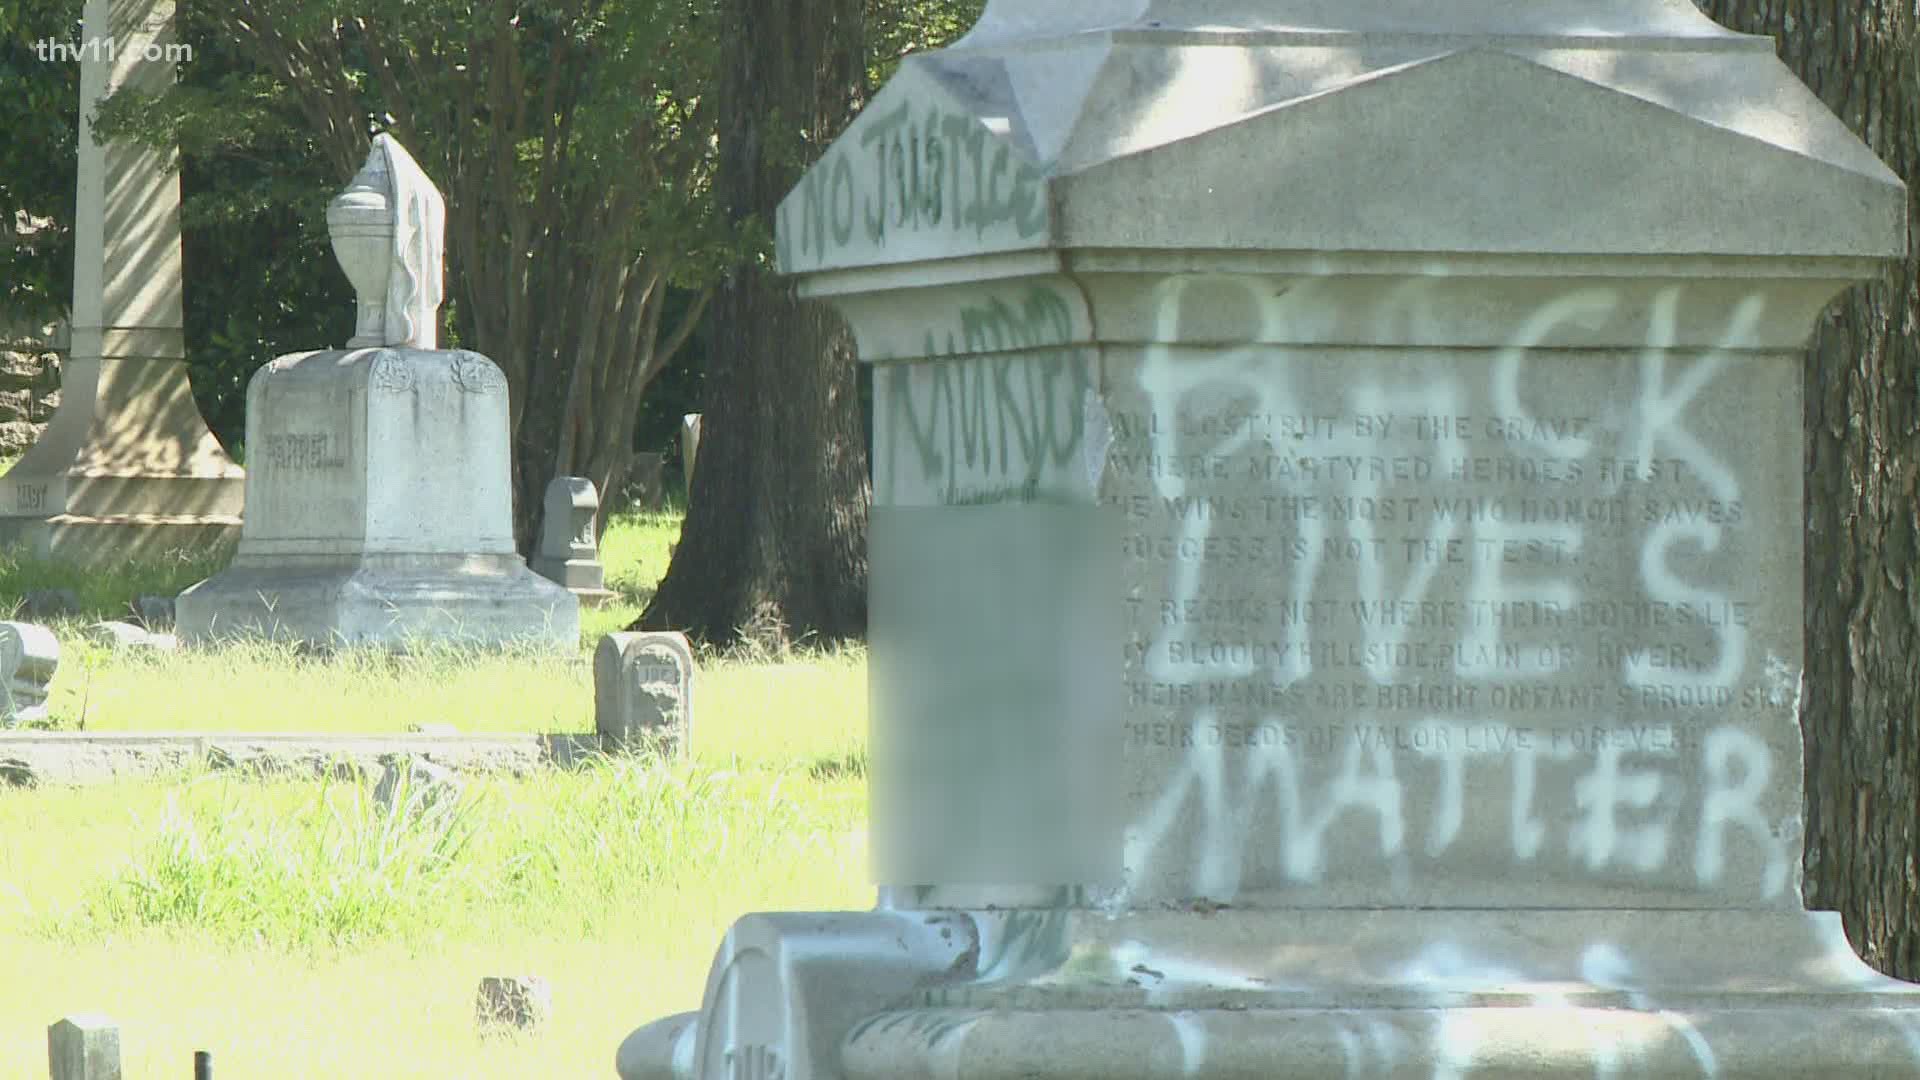 Little Rock police are investigating after a confederate solider statue and several headstones were found damaged at the Oakland and Fraternal Historic Cemetery Park